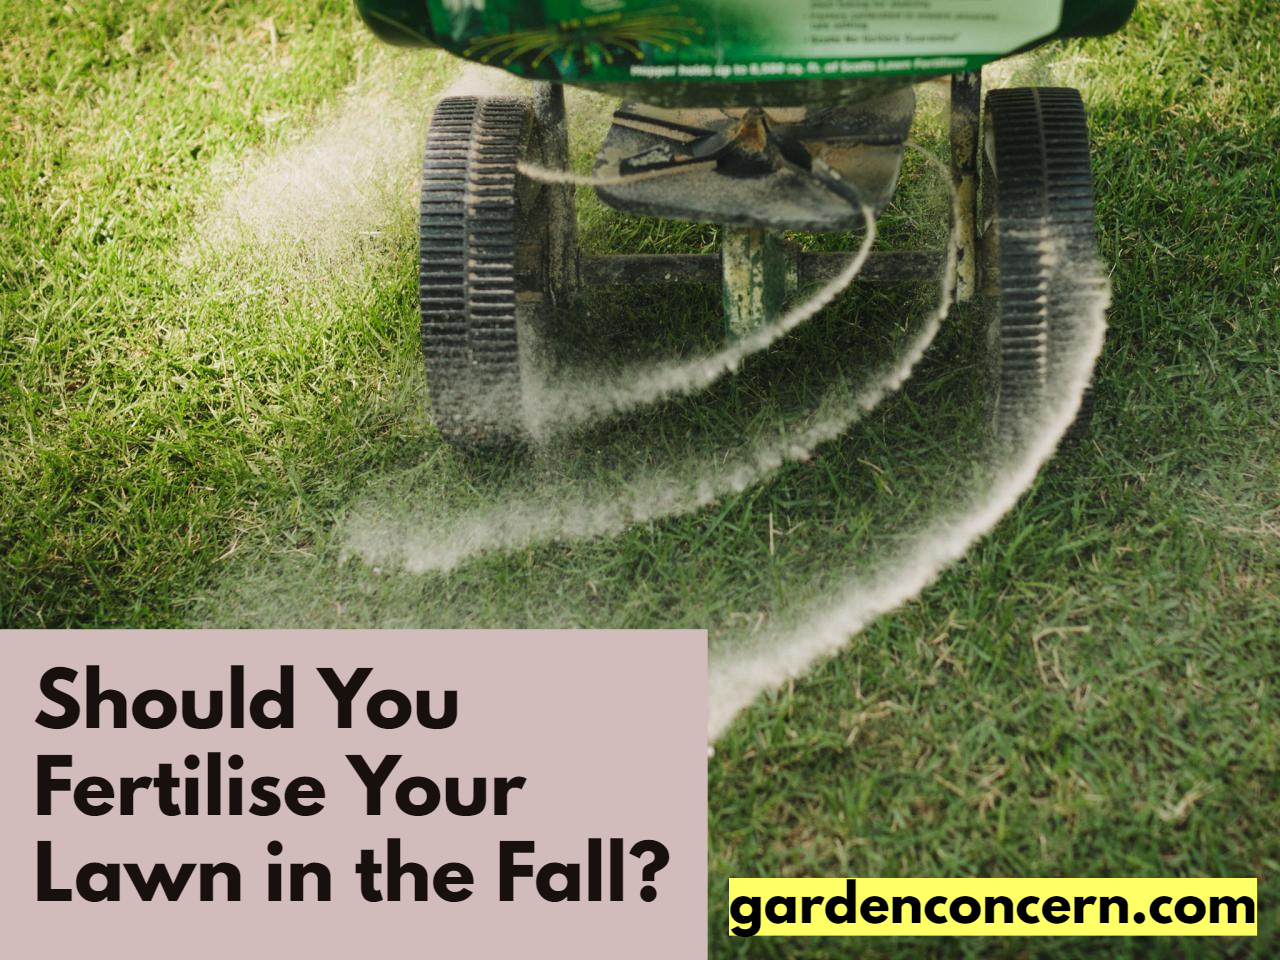 Should You Fertilise Your Lawn in the Fall?